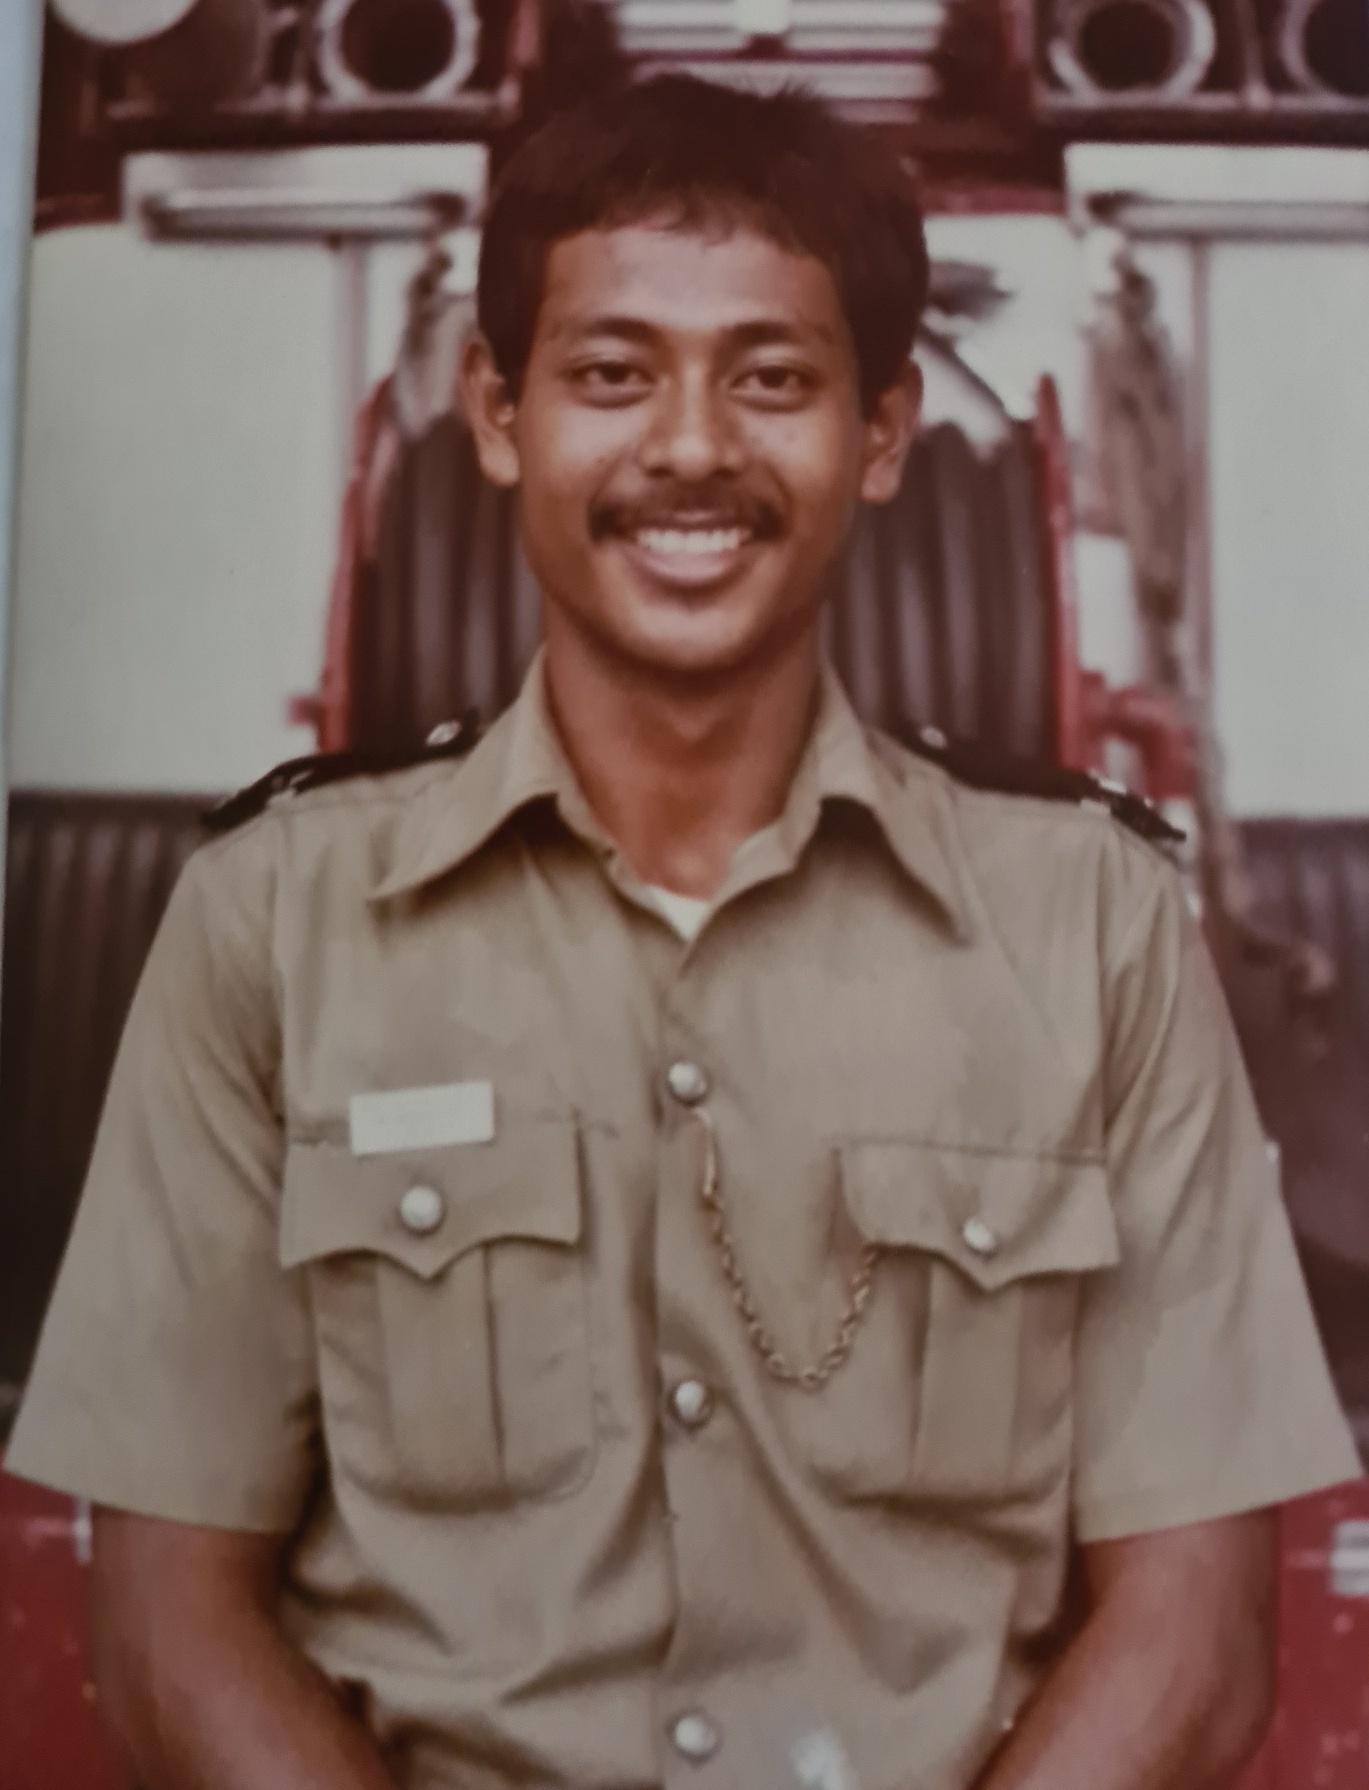 This picture was taken when SWO (RET) Md Salleh assumed the role  of a Leading Fireman No. 5 (a rank structure of the past).